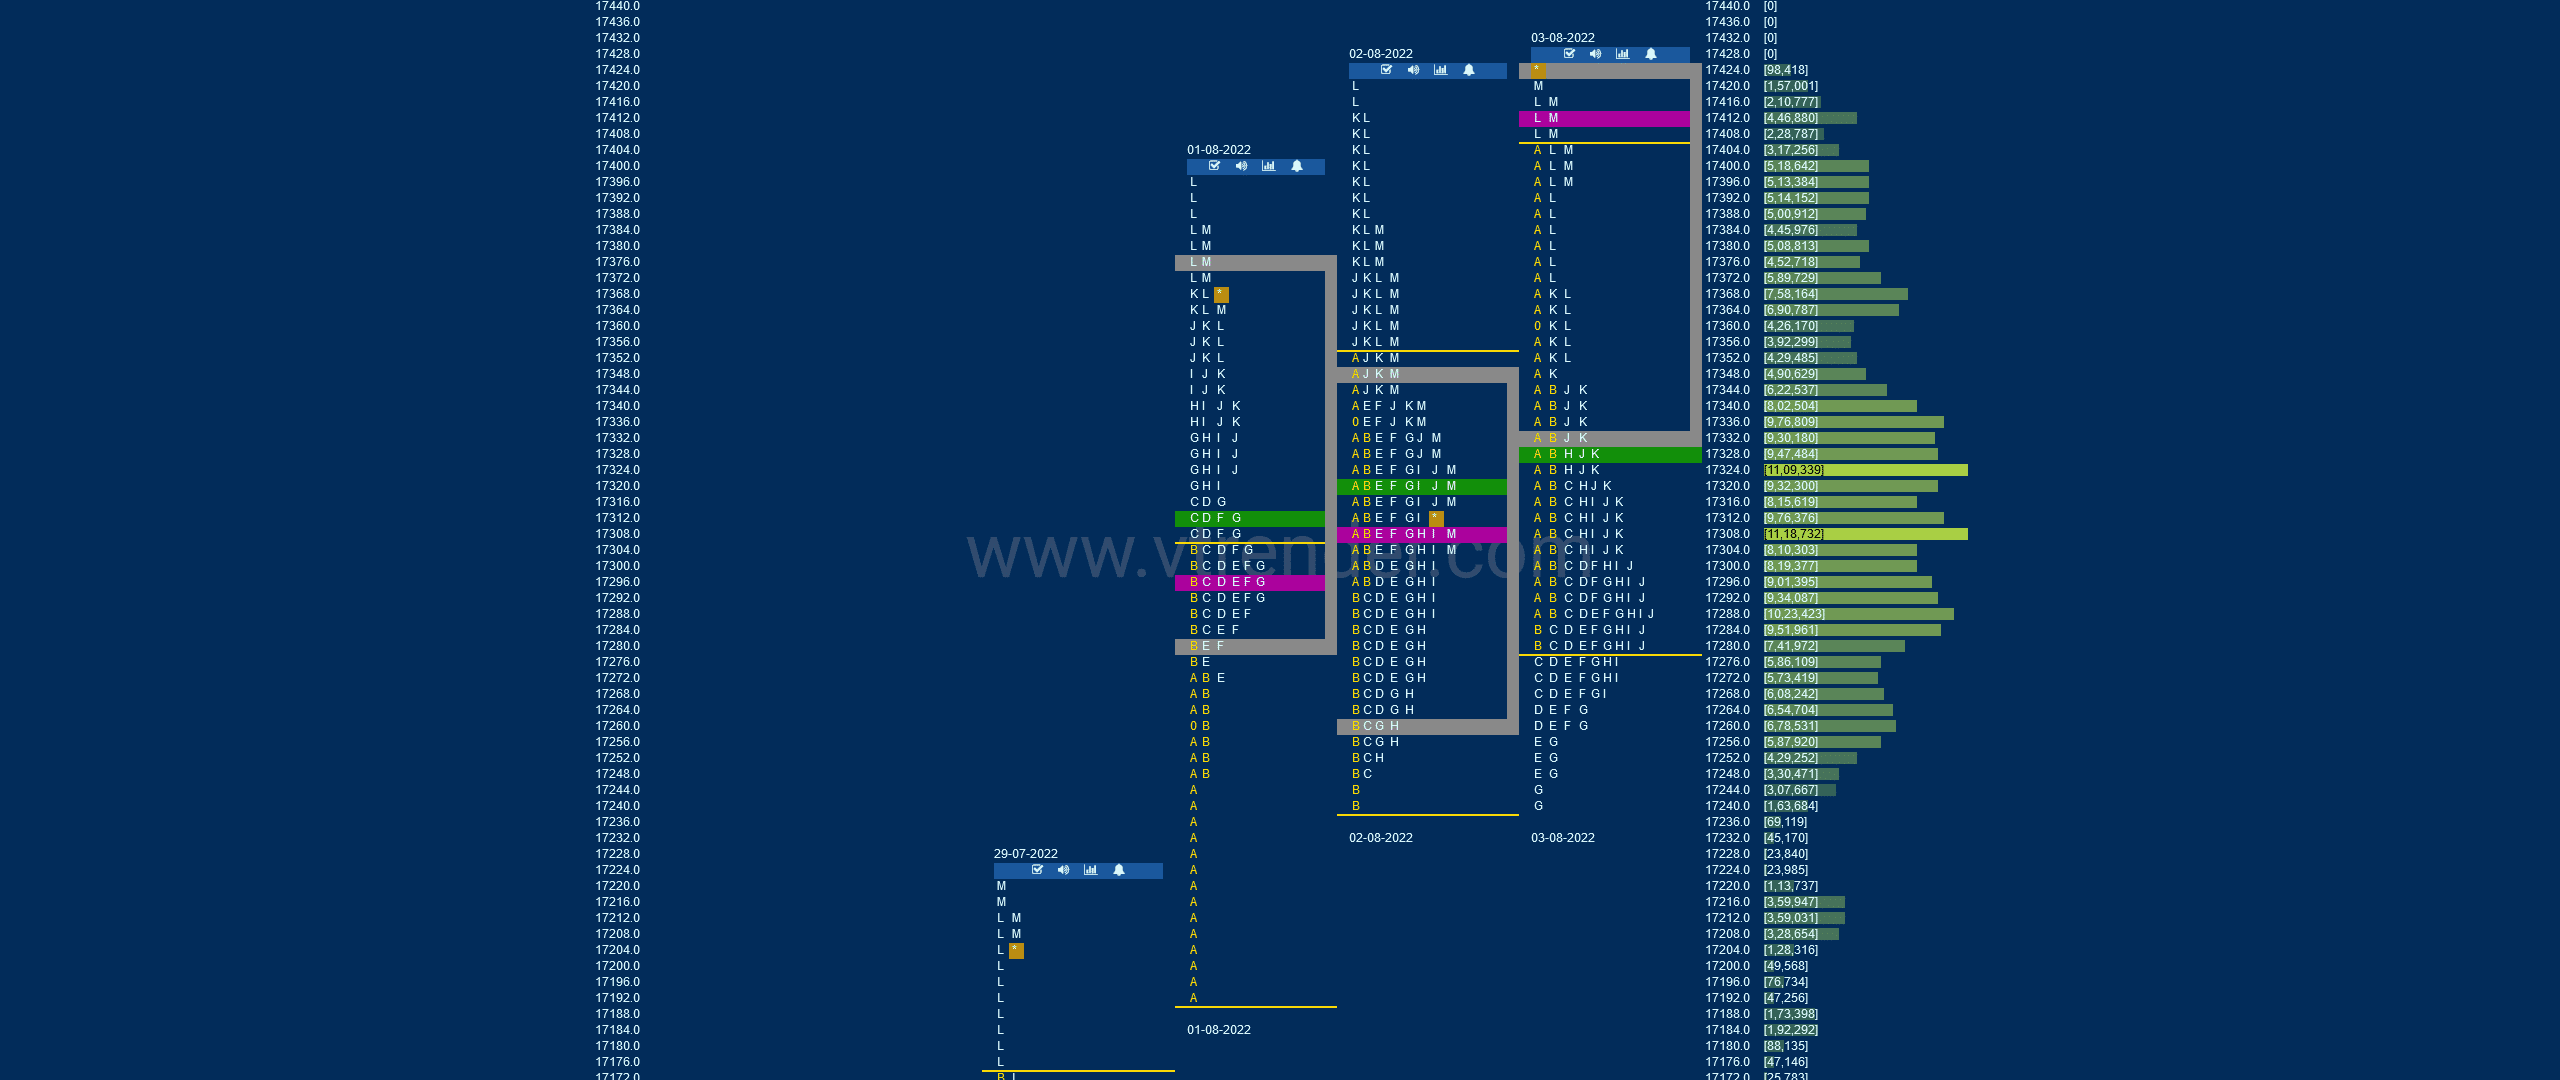 Nf 3 Market Profile Analysis Dated 03Rd Aug 2022 Banknifty Futures, Charts, Day Trading, Intraday Trading, Intraday Trading Strategies, Market Profile, Market Profile Trading Strategies, Nifty Futures, Order Flow Analysis, Support And Resistance, Technical Analysis, Trading Strategies, Volume Profile Trading